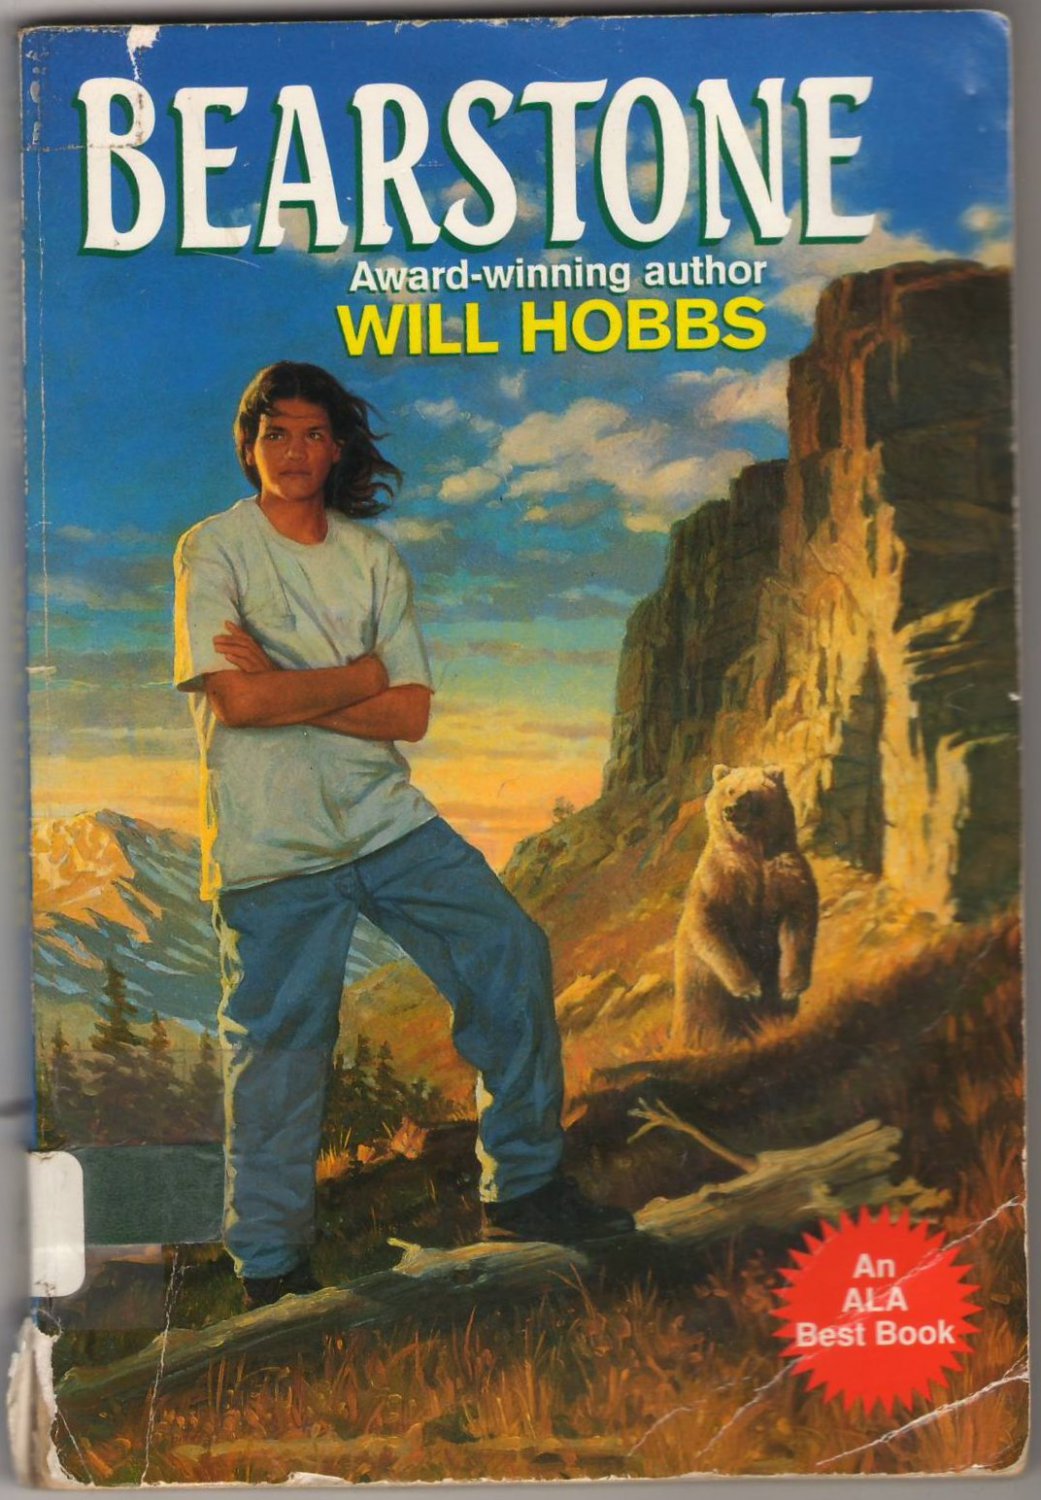 Bearstone by Will Hobbs Coming Of Age Story Cloyd Softcover Novel Fiction Fantasy Book Paperback